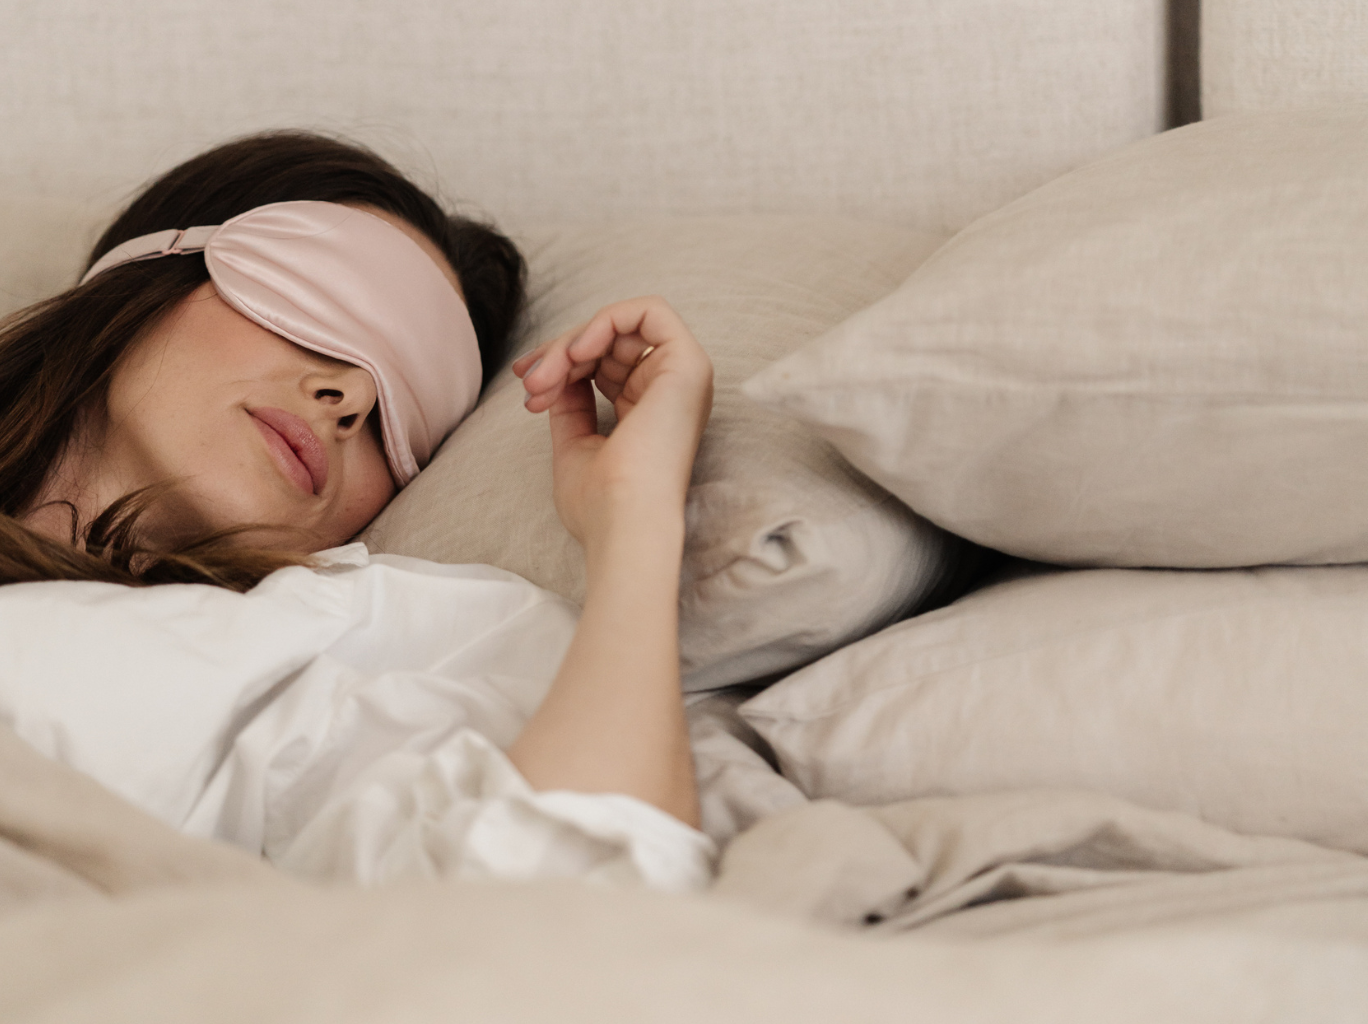 A female entrepreneur on vacation in the new year and resting in bed with an eye mask on, in order to prioritize her mental health, prevent burnout and create healthy habits.